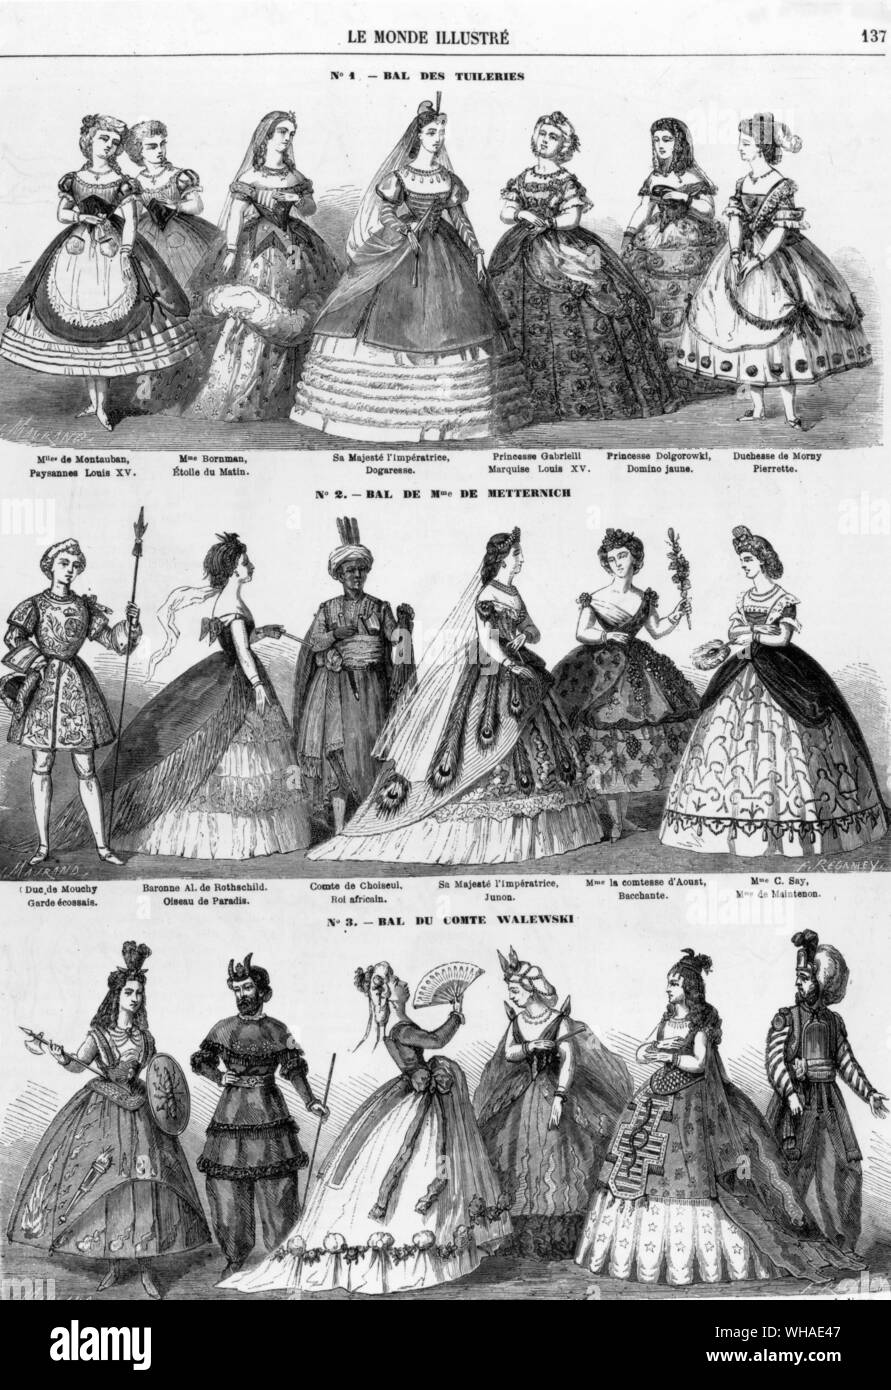 From Le Monde Illustre 28th February 1863. Fancy dress costumes worn by the Empress Eugenie and others to parties in Paris in 1863 Stock Photo